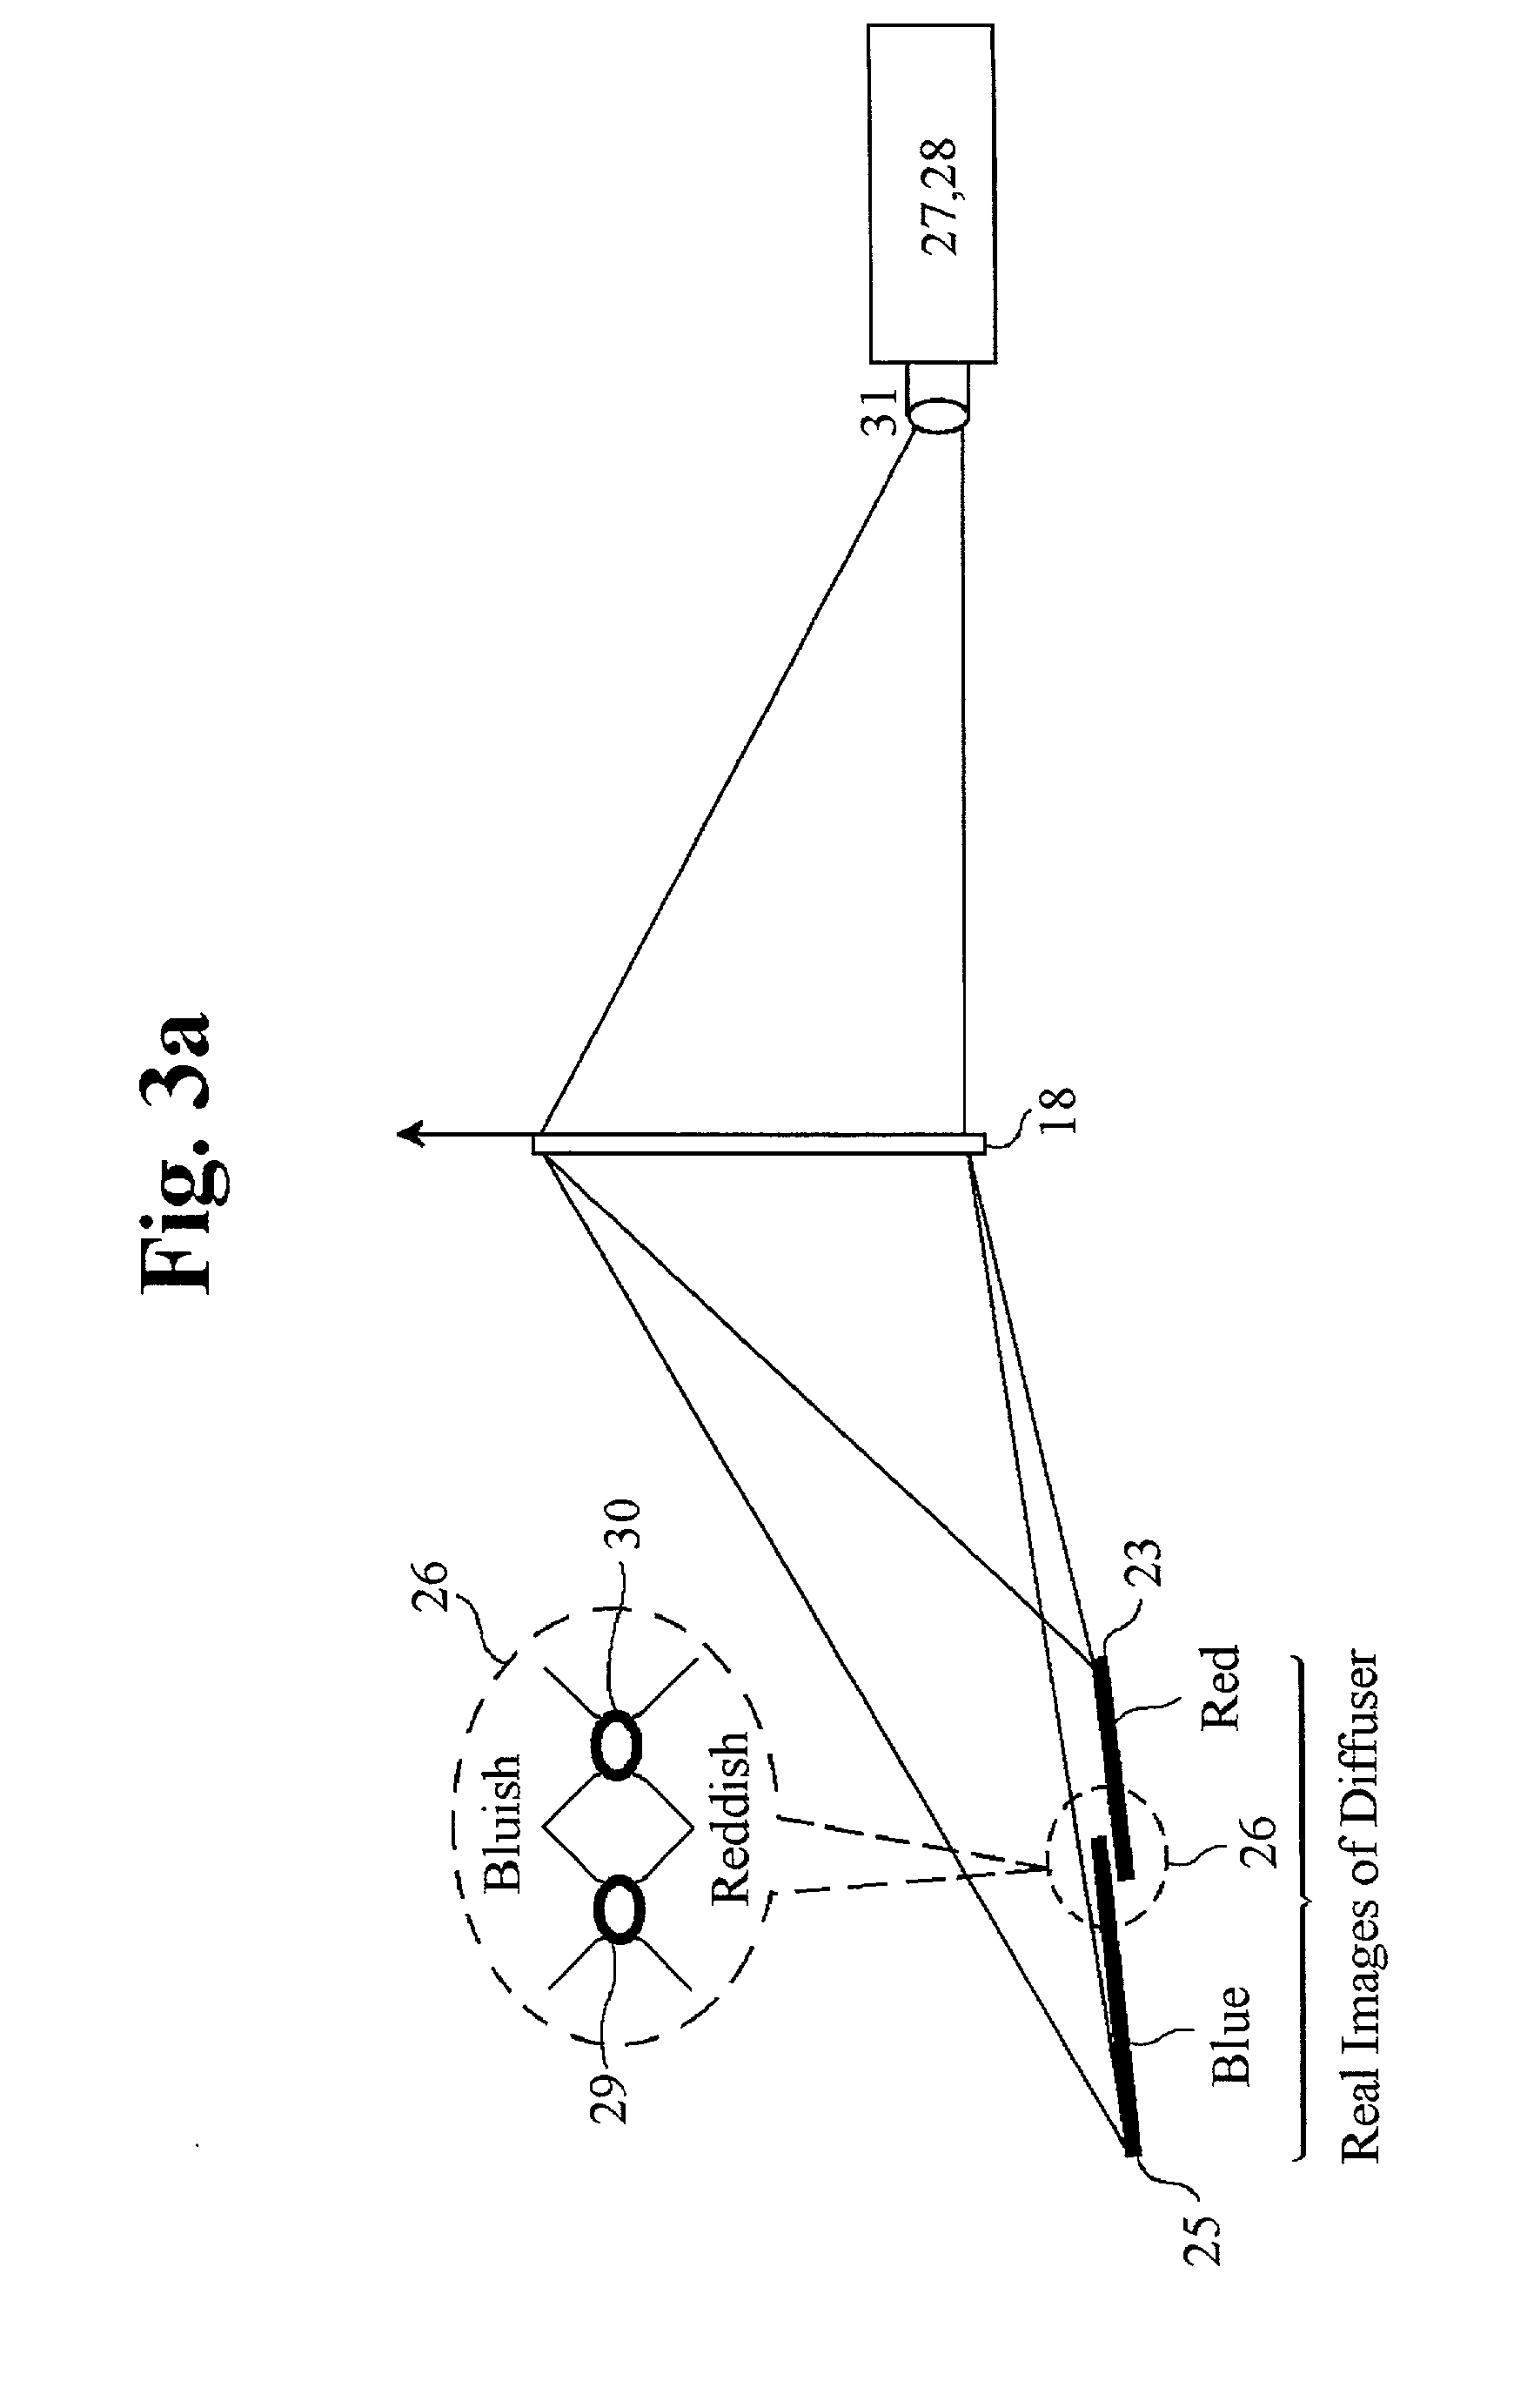 Holographic projection screen for displaying a three-dimensional color images and optical display system using the holographic screen